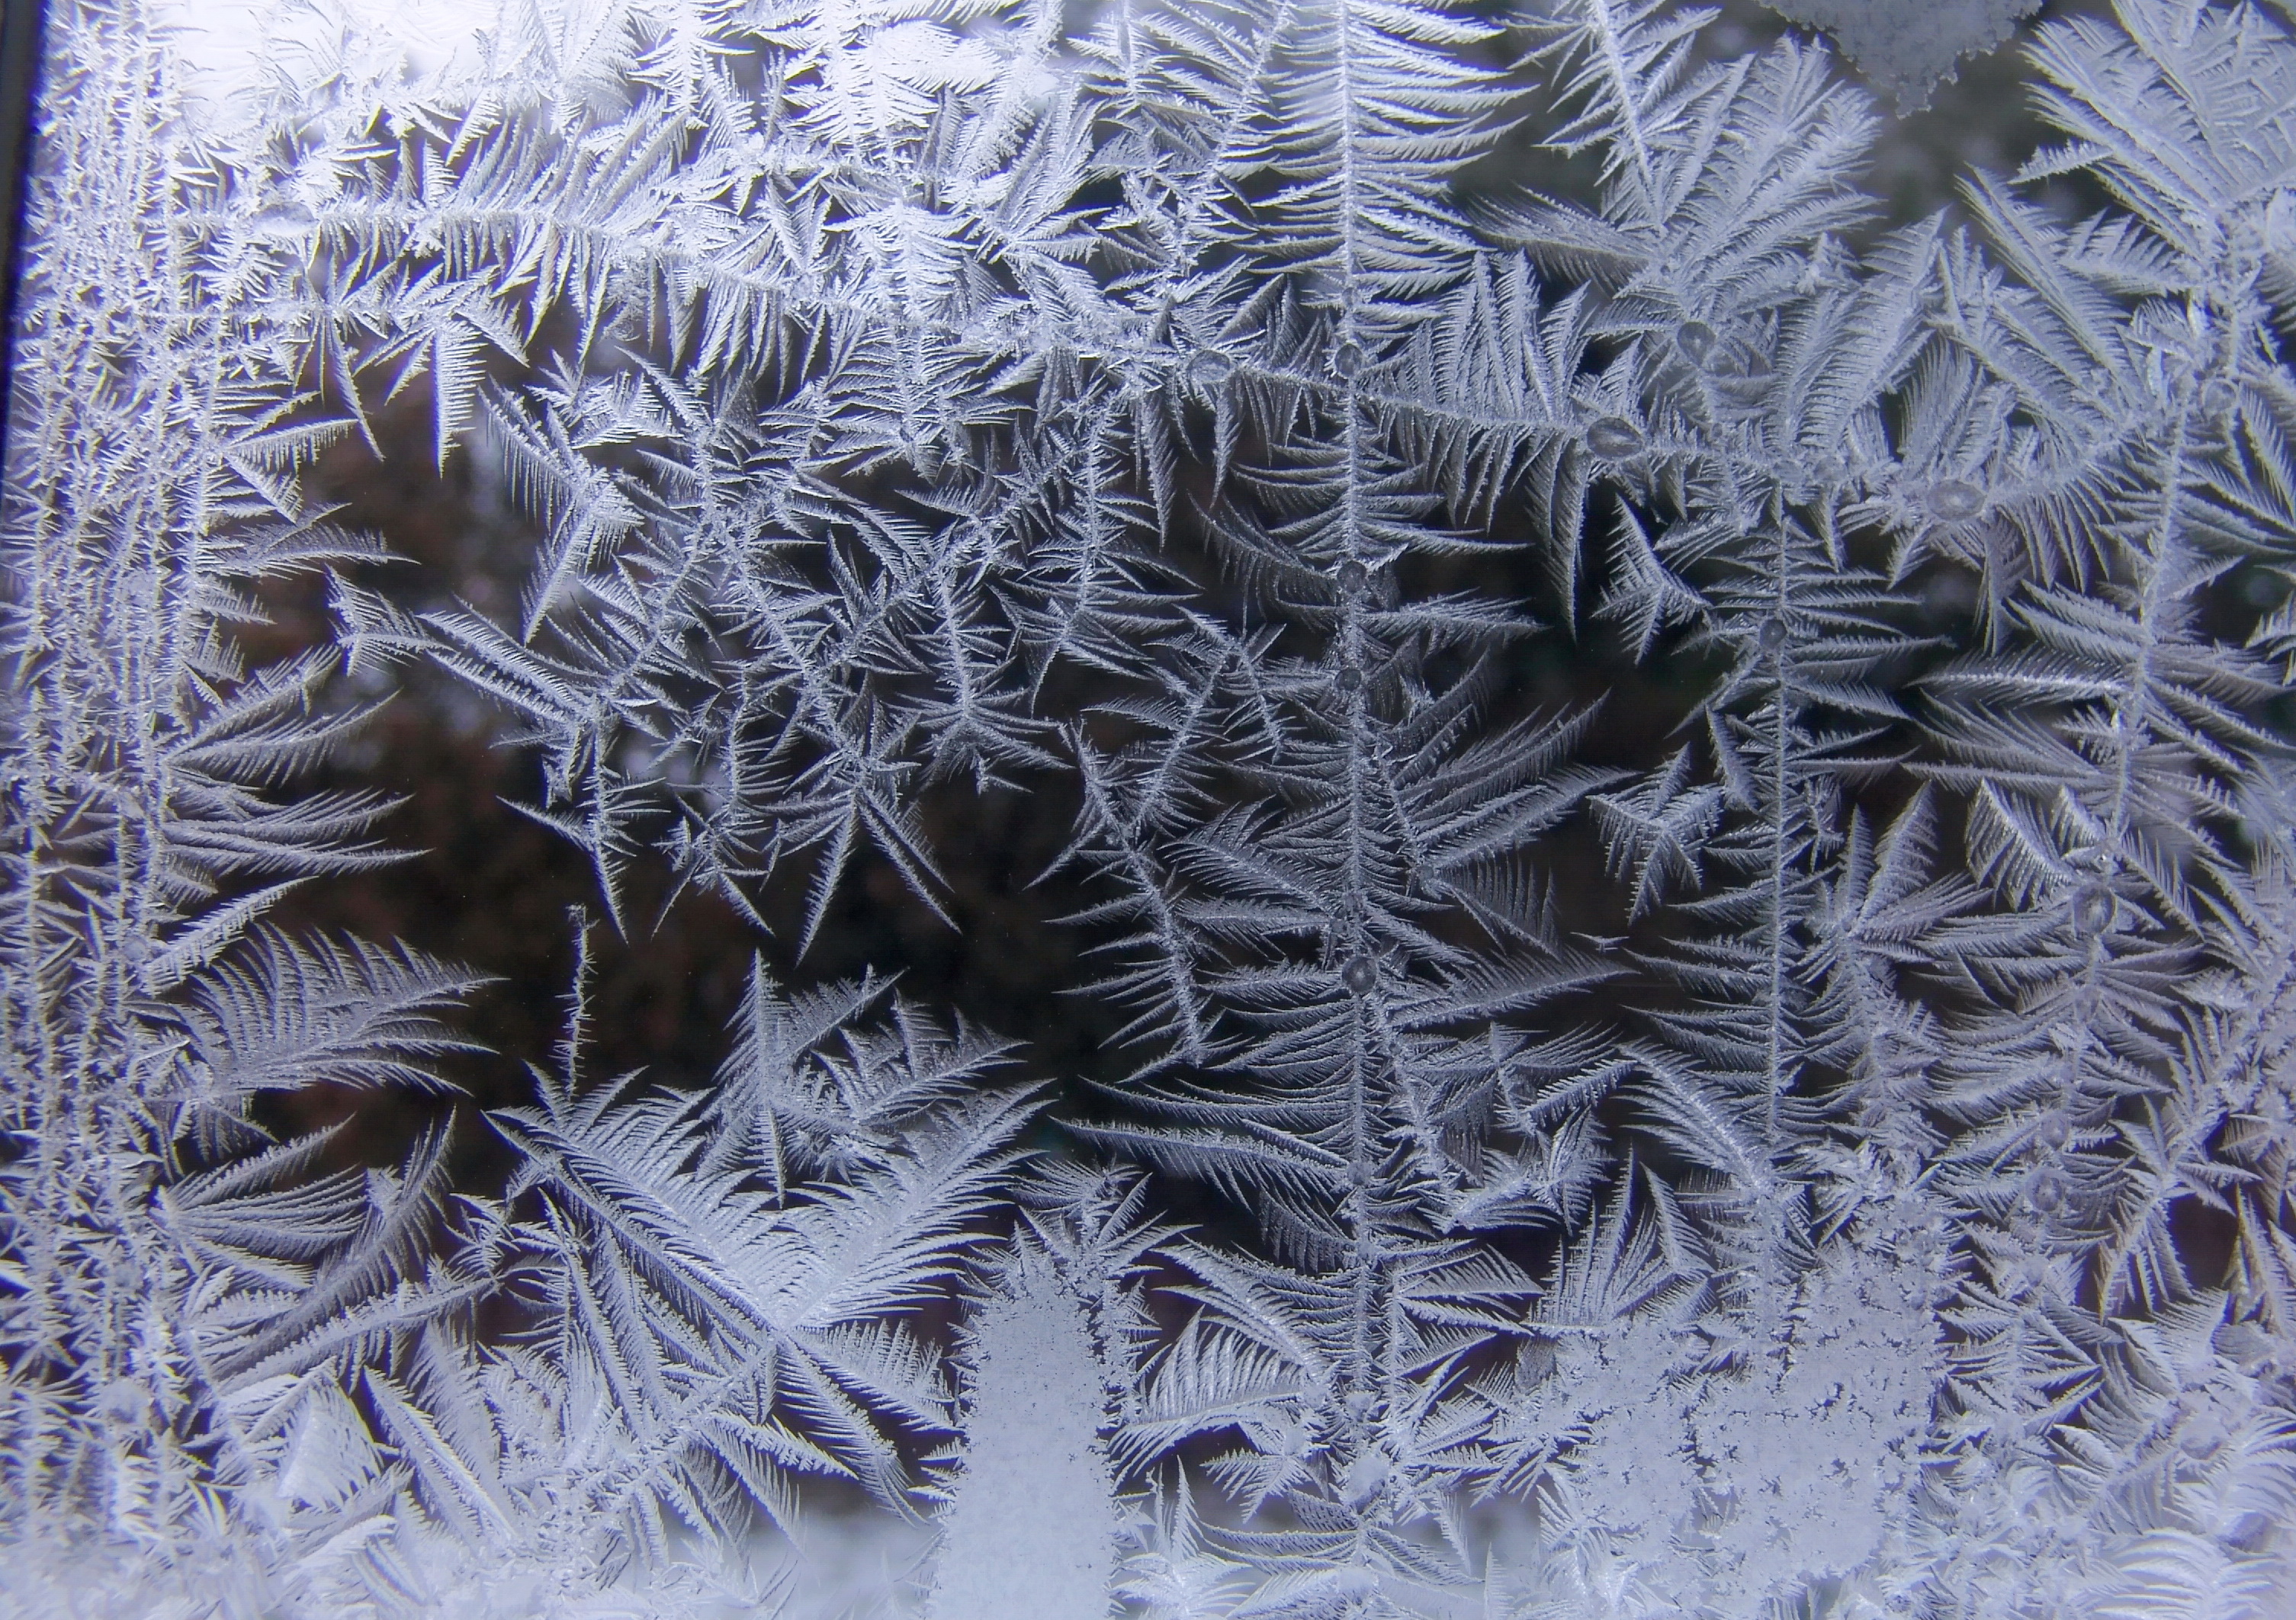 File:Ice crystals at window07.jpg - Wikimedia Commons